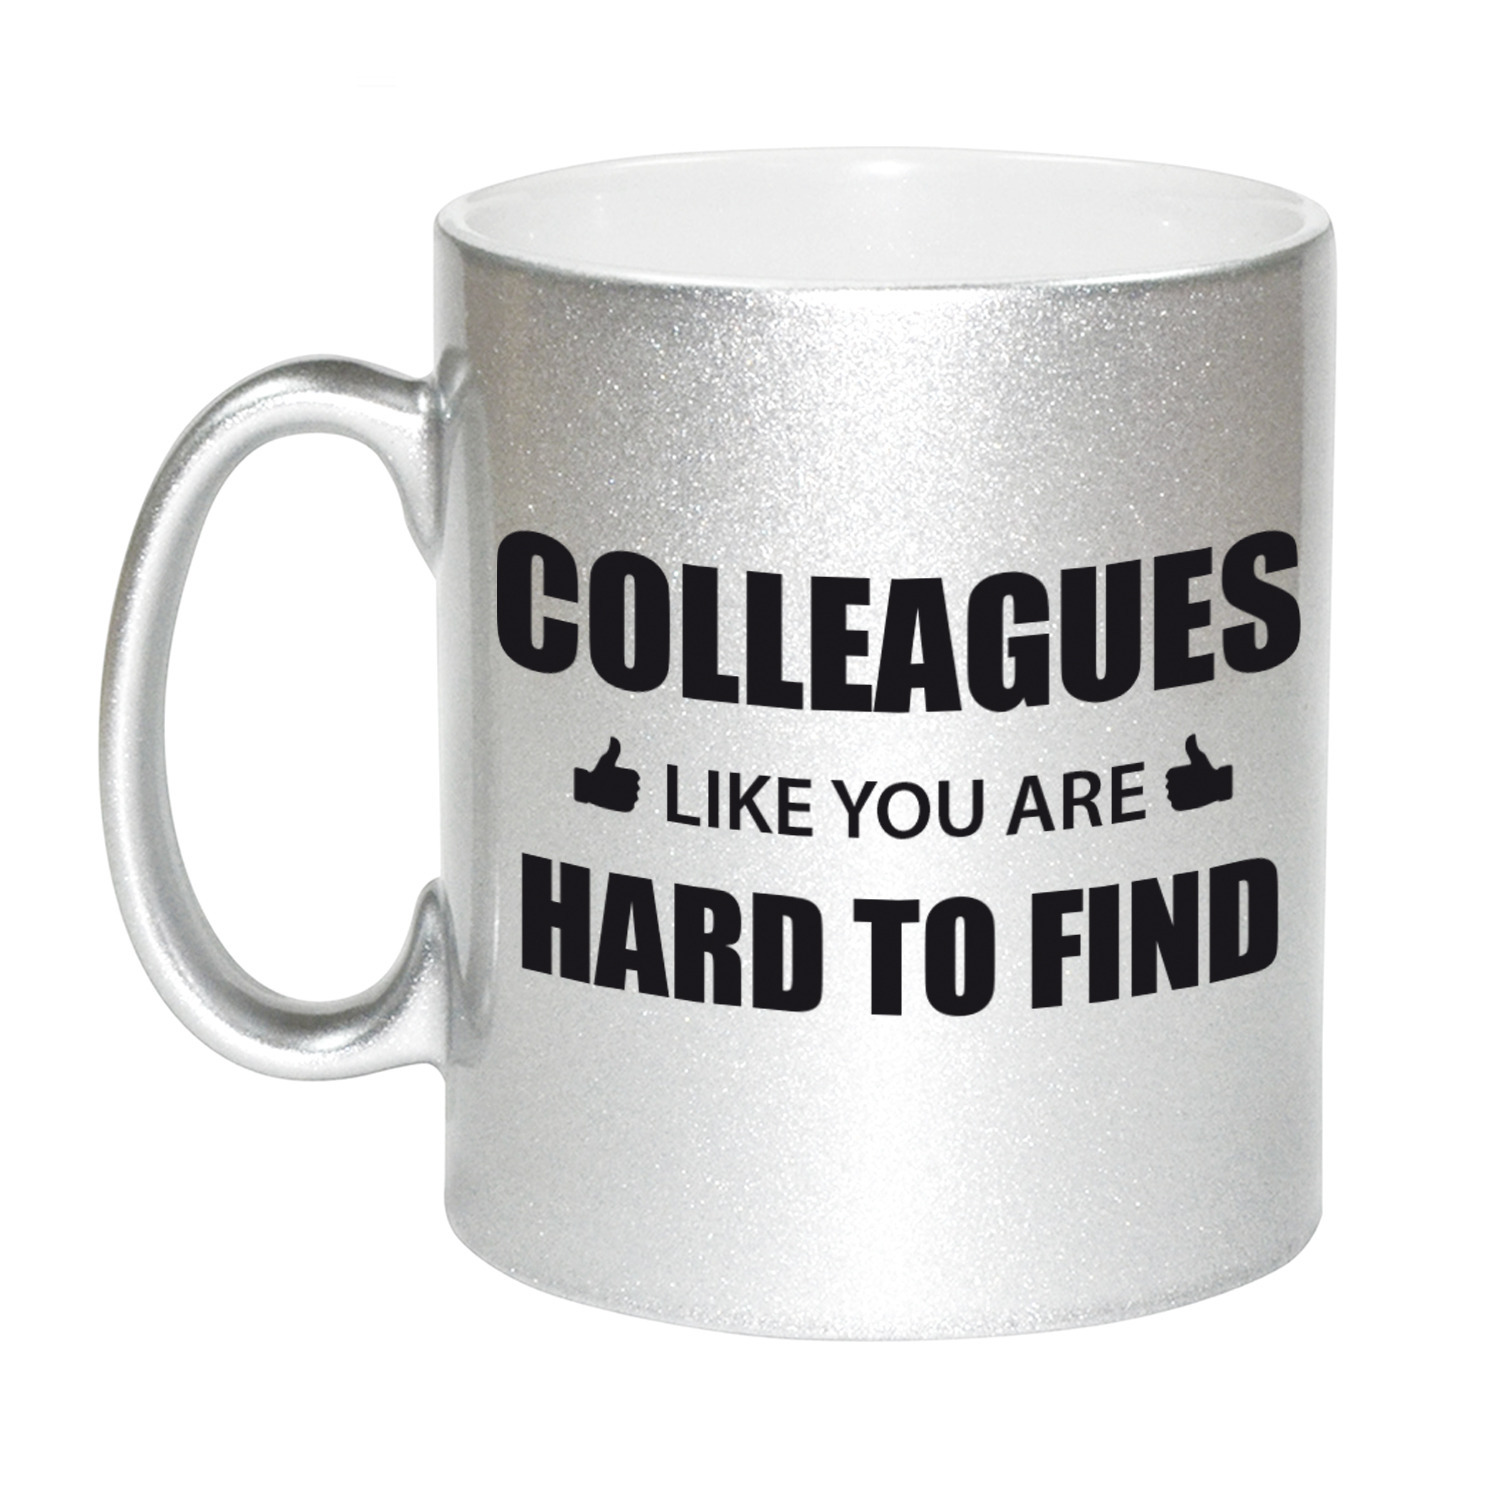 Collega cadeau mok / beker zilver colleagues like you are hard to find